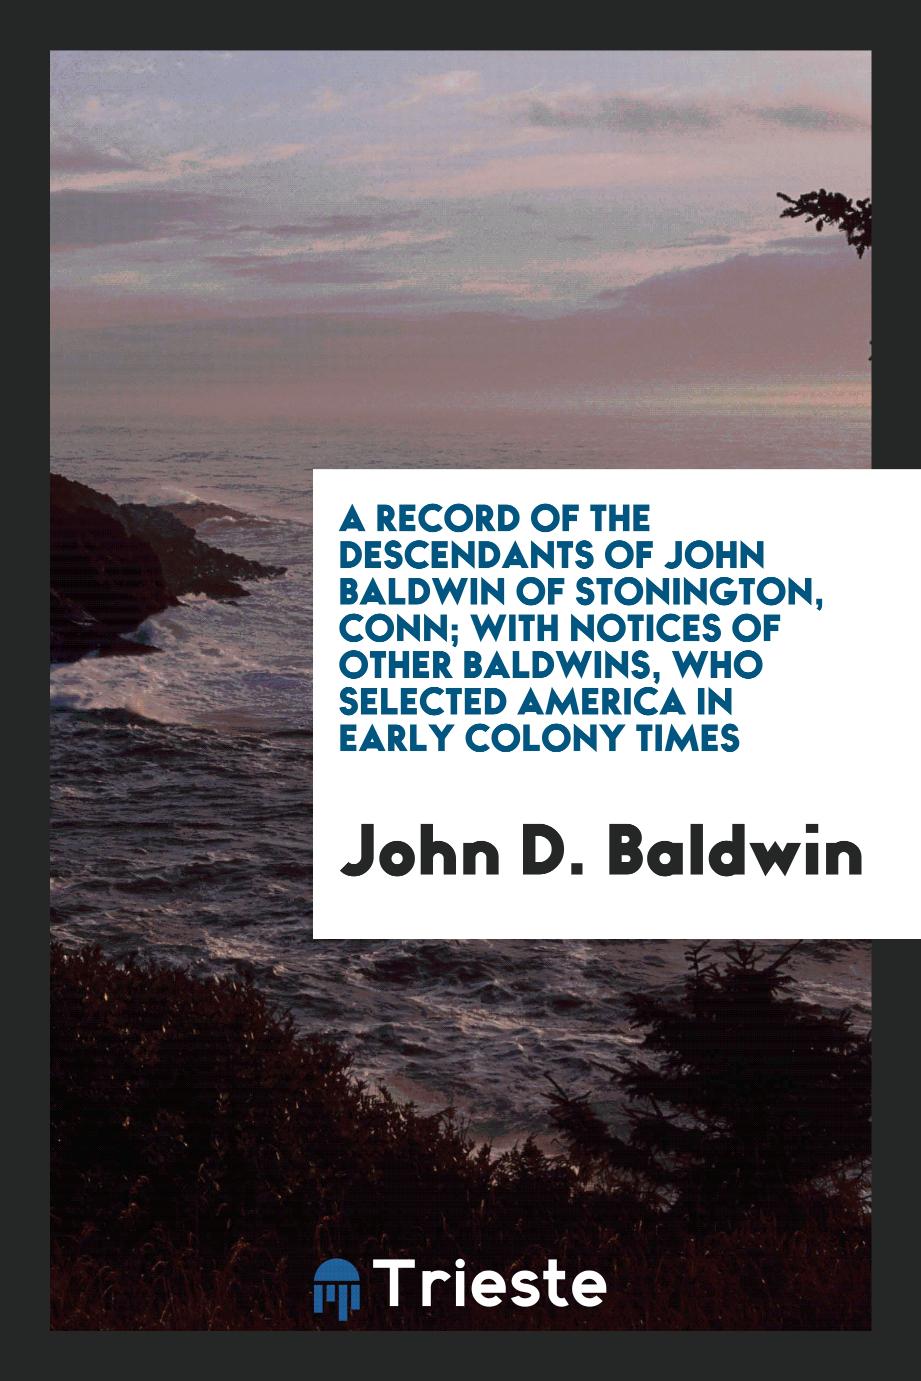 A Record of the Descendants of John Baldwin of Stonington, Conn; With Notices of Other Baldwins, who selected America in early colony times